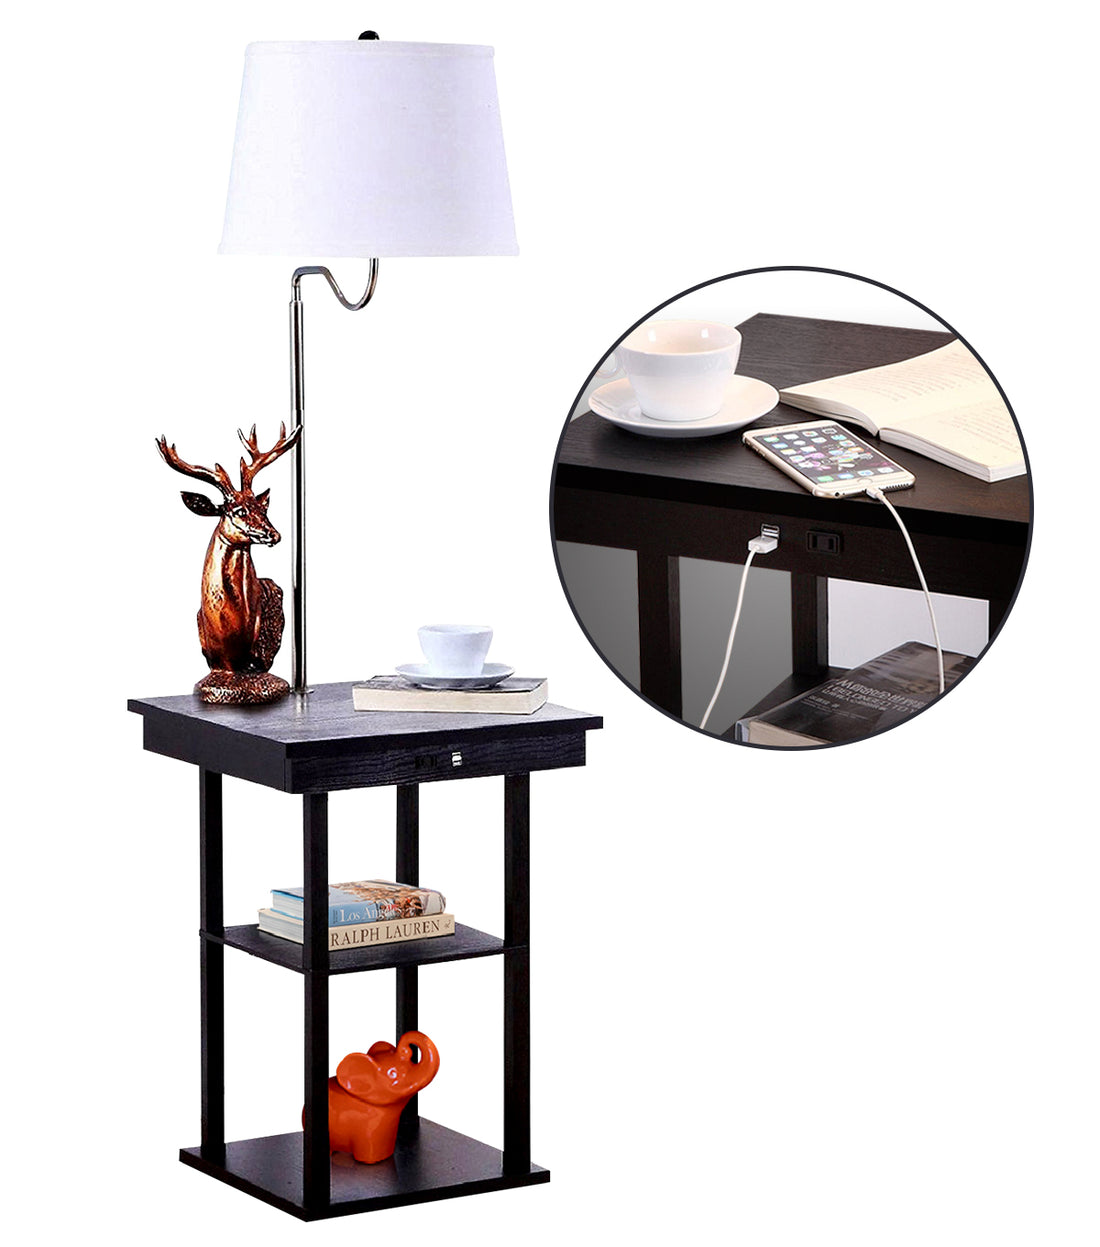 Brightech Madison - Narrow Nightstand with Built in Lamp, USB Port & Shelves for Bedrooms - Mid Century Modern End Table & Attached Floor Lamp for Living Rooms - Side Table & Reading Light